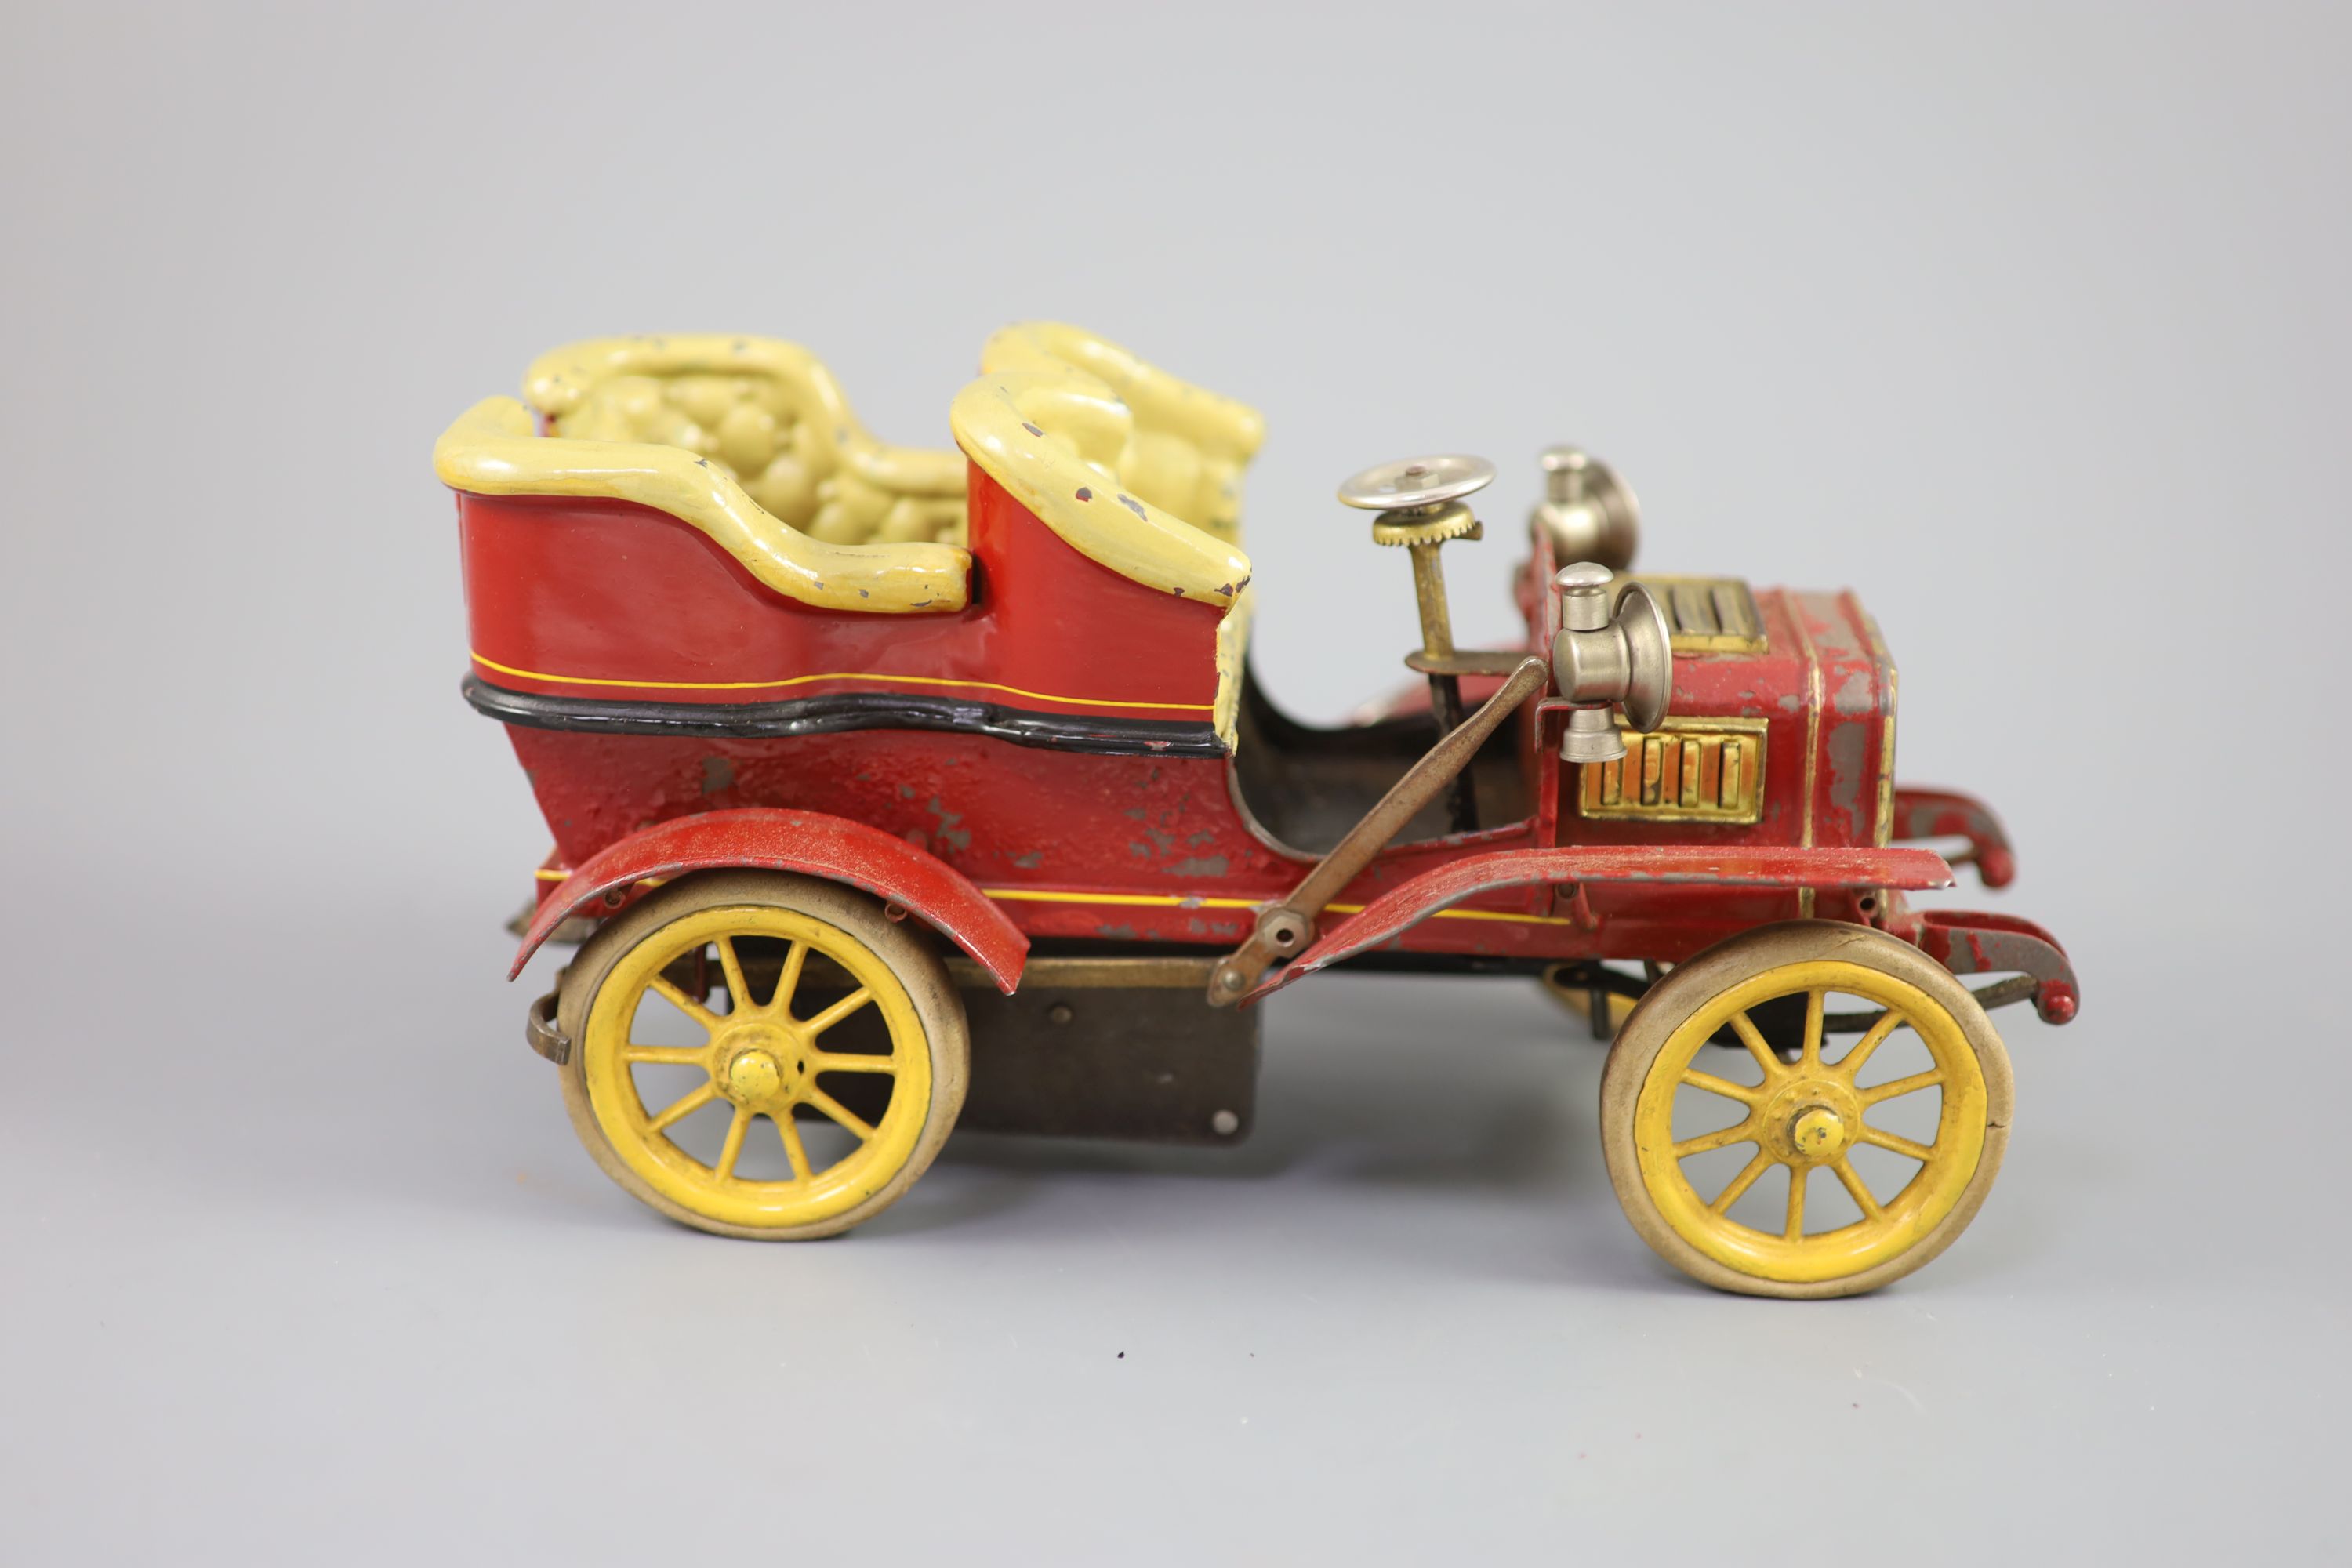 A Bing clockwork tinplate car, c.1906, length 9.5in. width 5in., with original card box and winding key